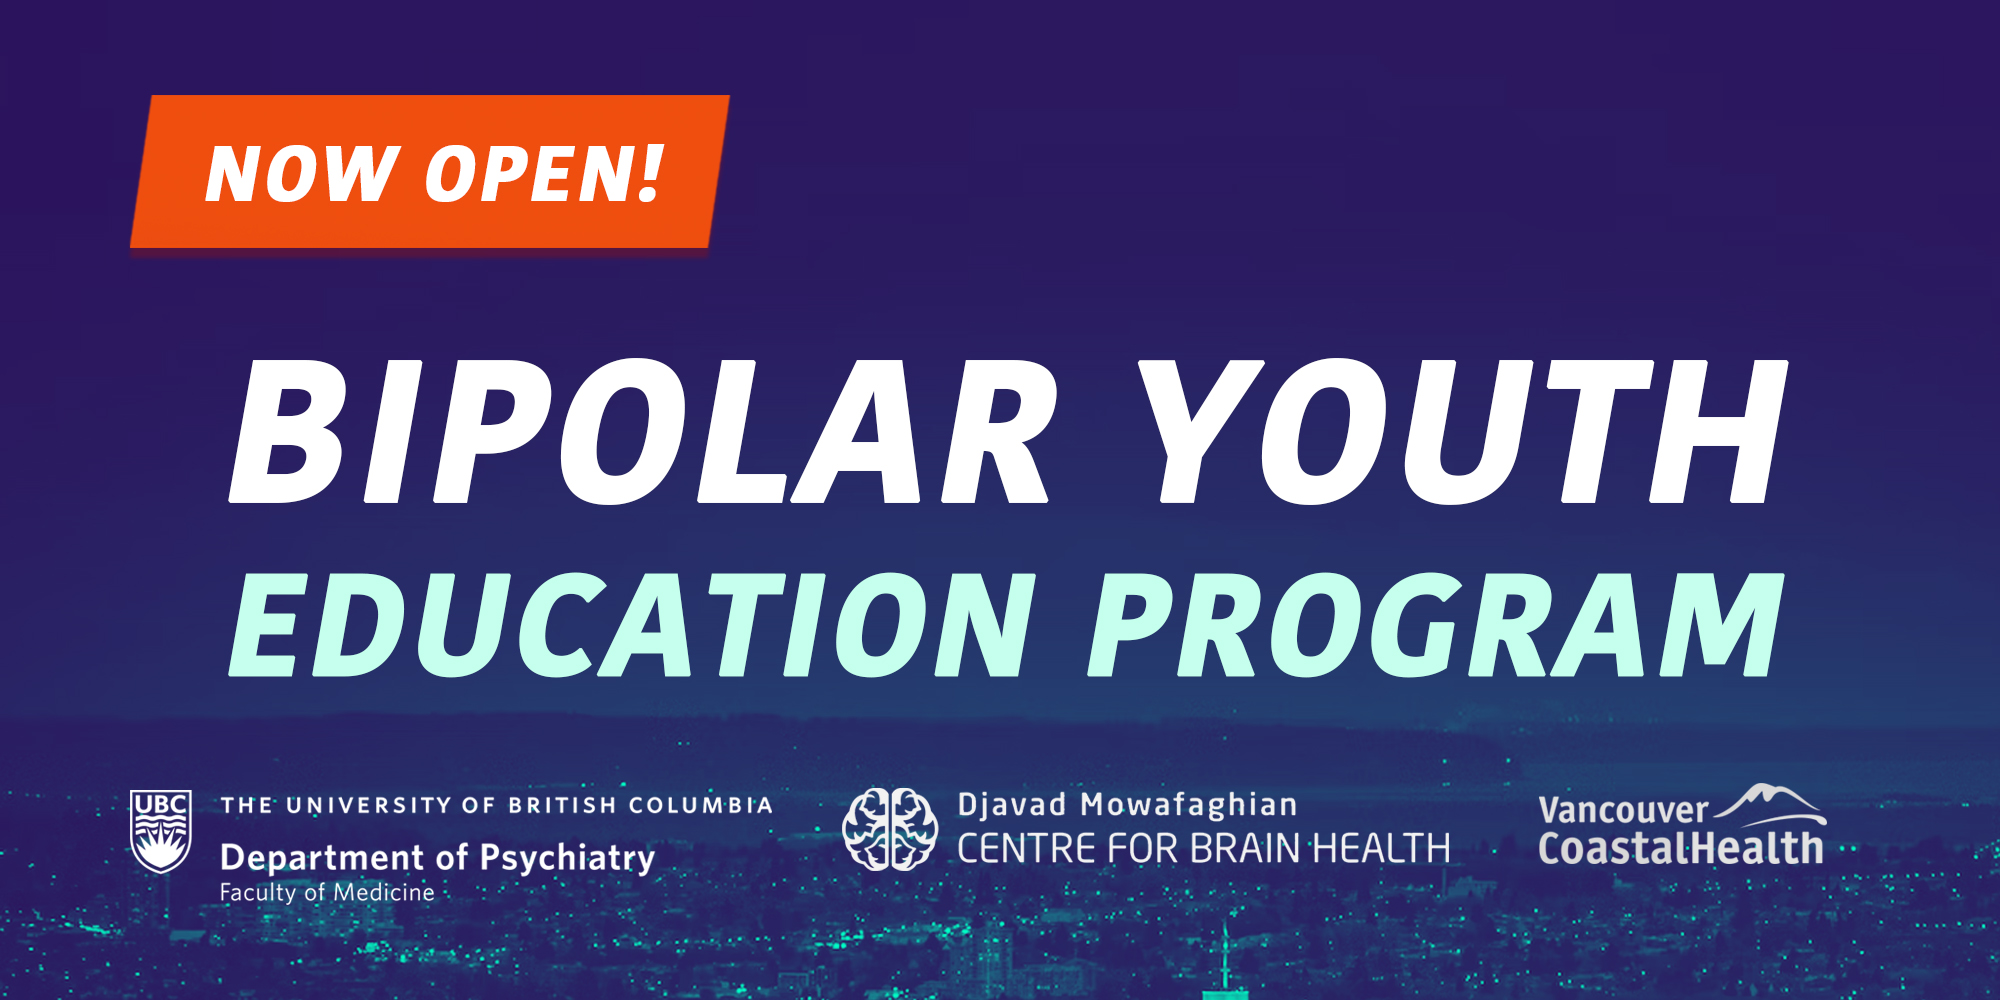 Bipolar Disorder Education Program for Youth (Vancouver, BC)